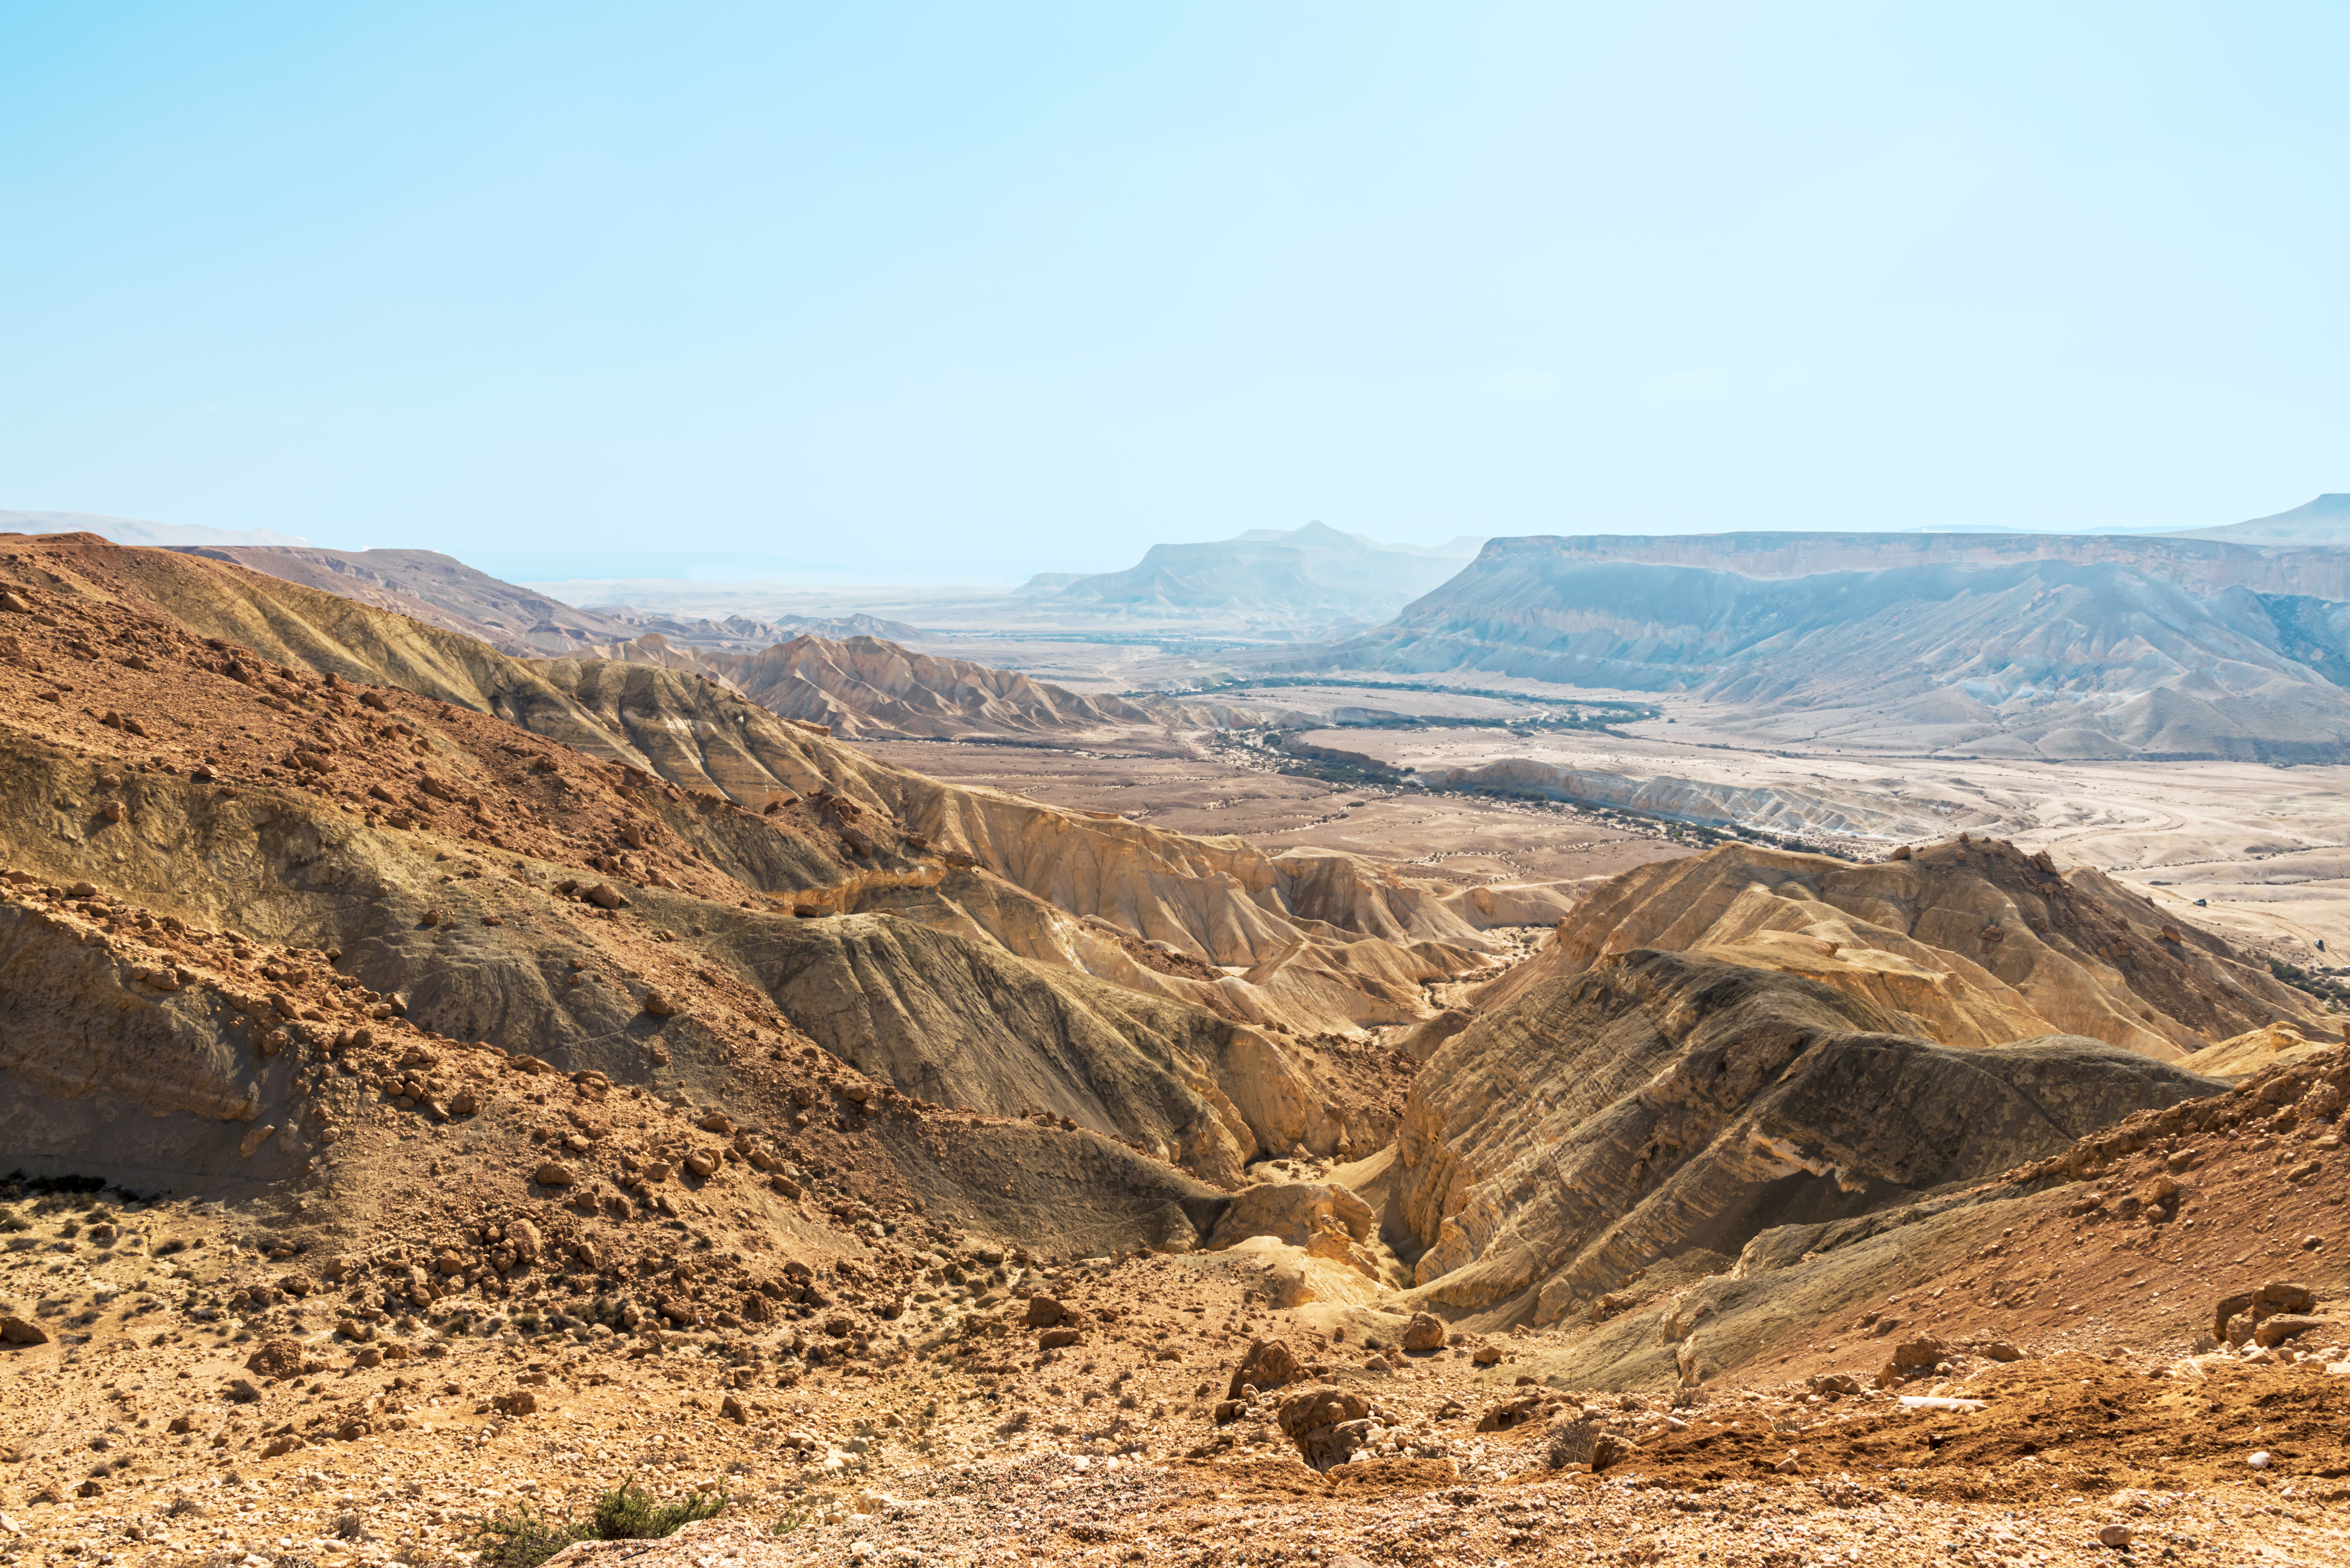 View of the canyon in the Negev desert from the kibbutz Sde Boke